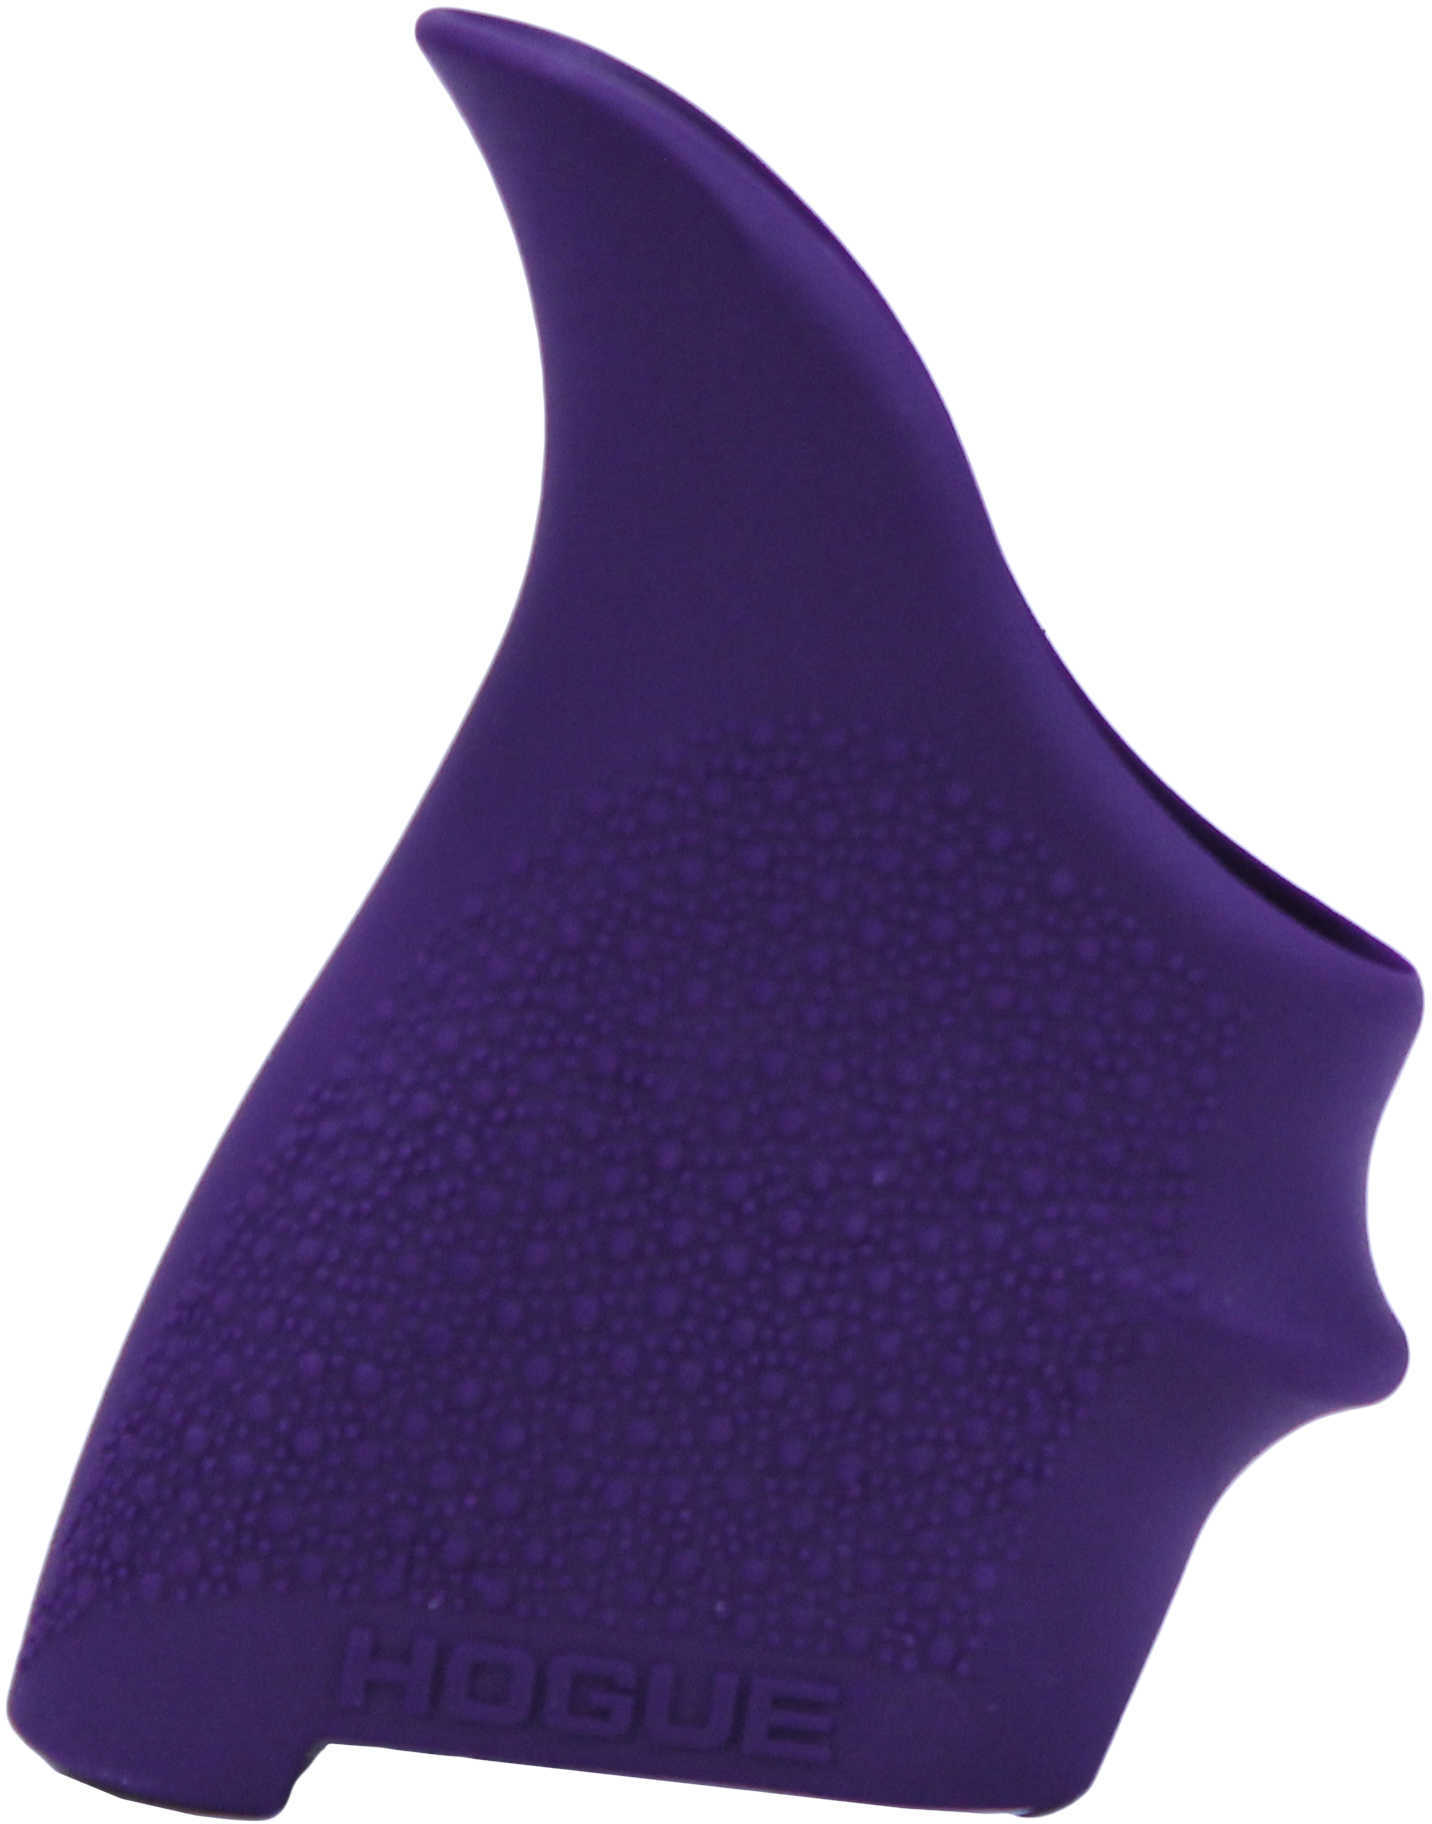 Hogue 18406 HandAll Beavertail Grip Sleeve Fits S&W Shield 9; Ruger LC9; for Glock 26 Textured Rubber Purple